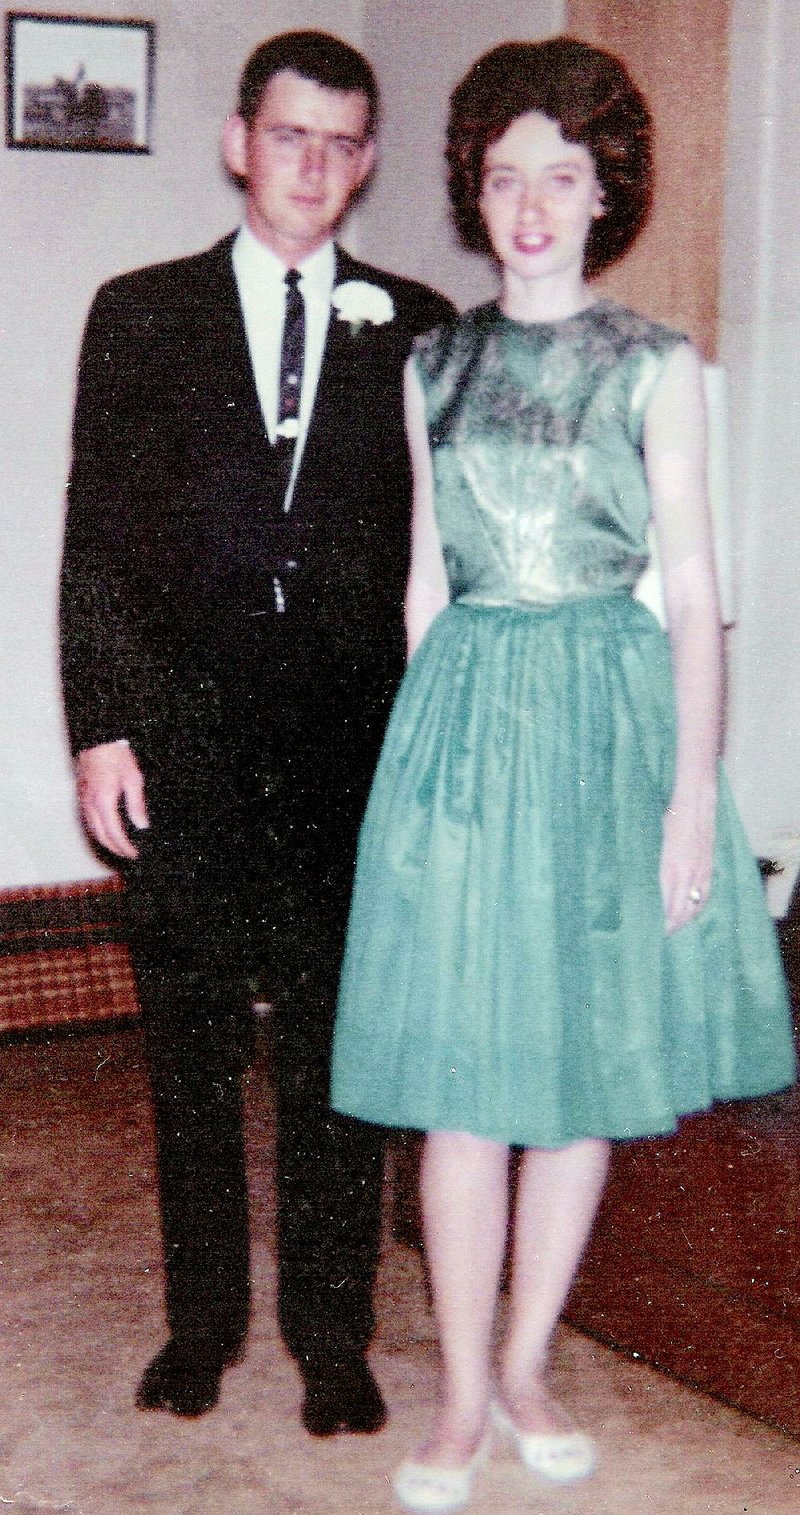 Jackie and Lauretta Tedford around the time of their wedding in 1965
